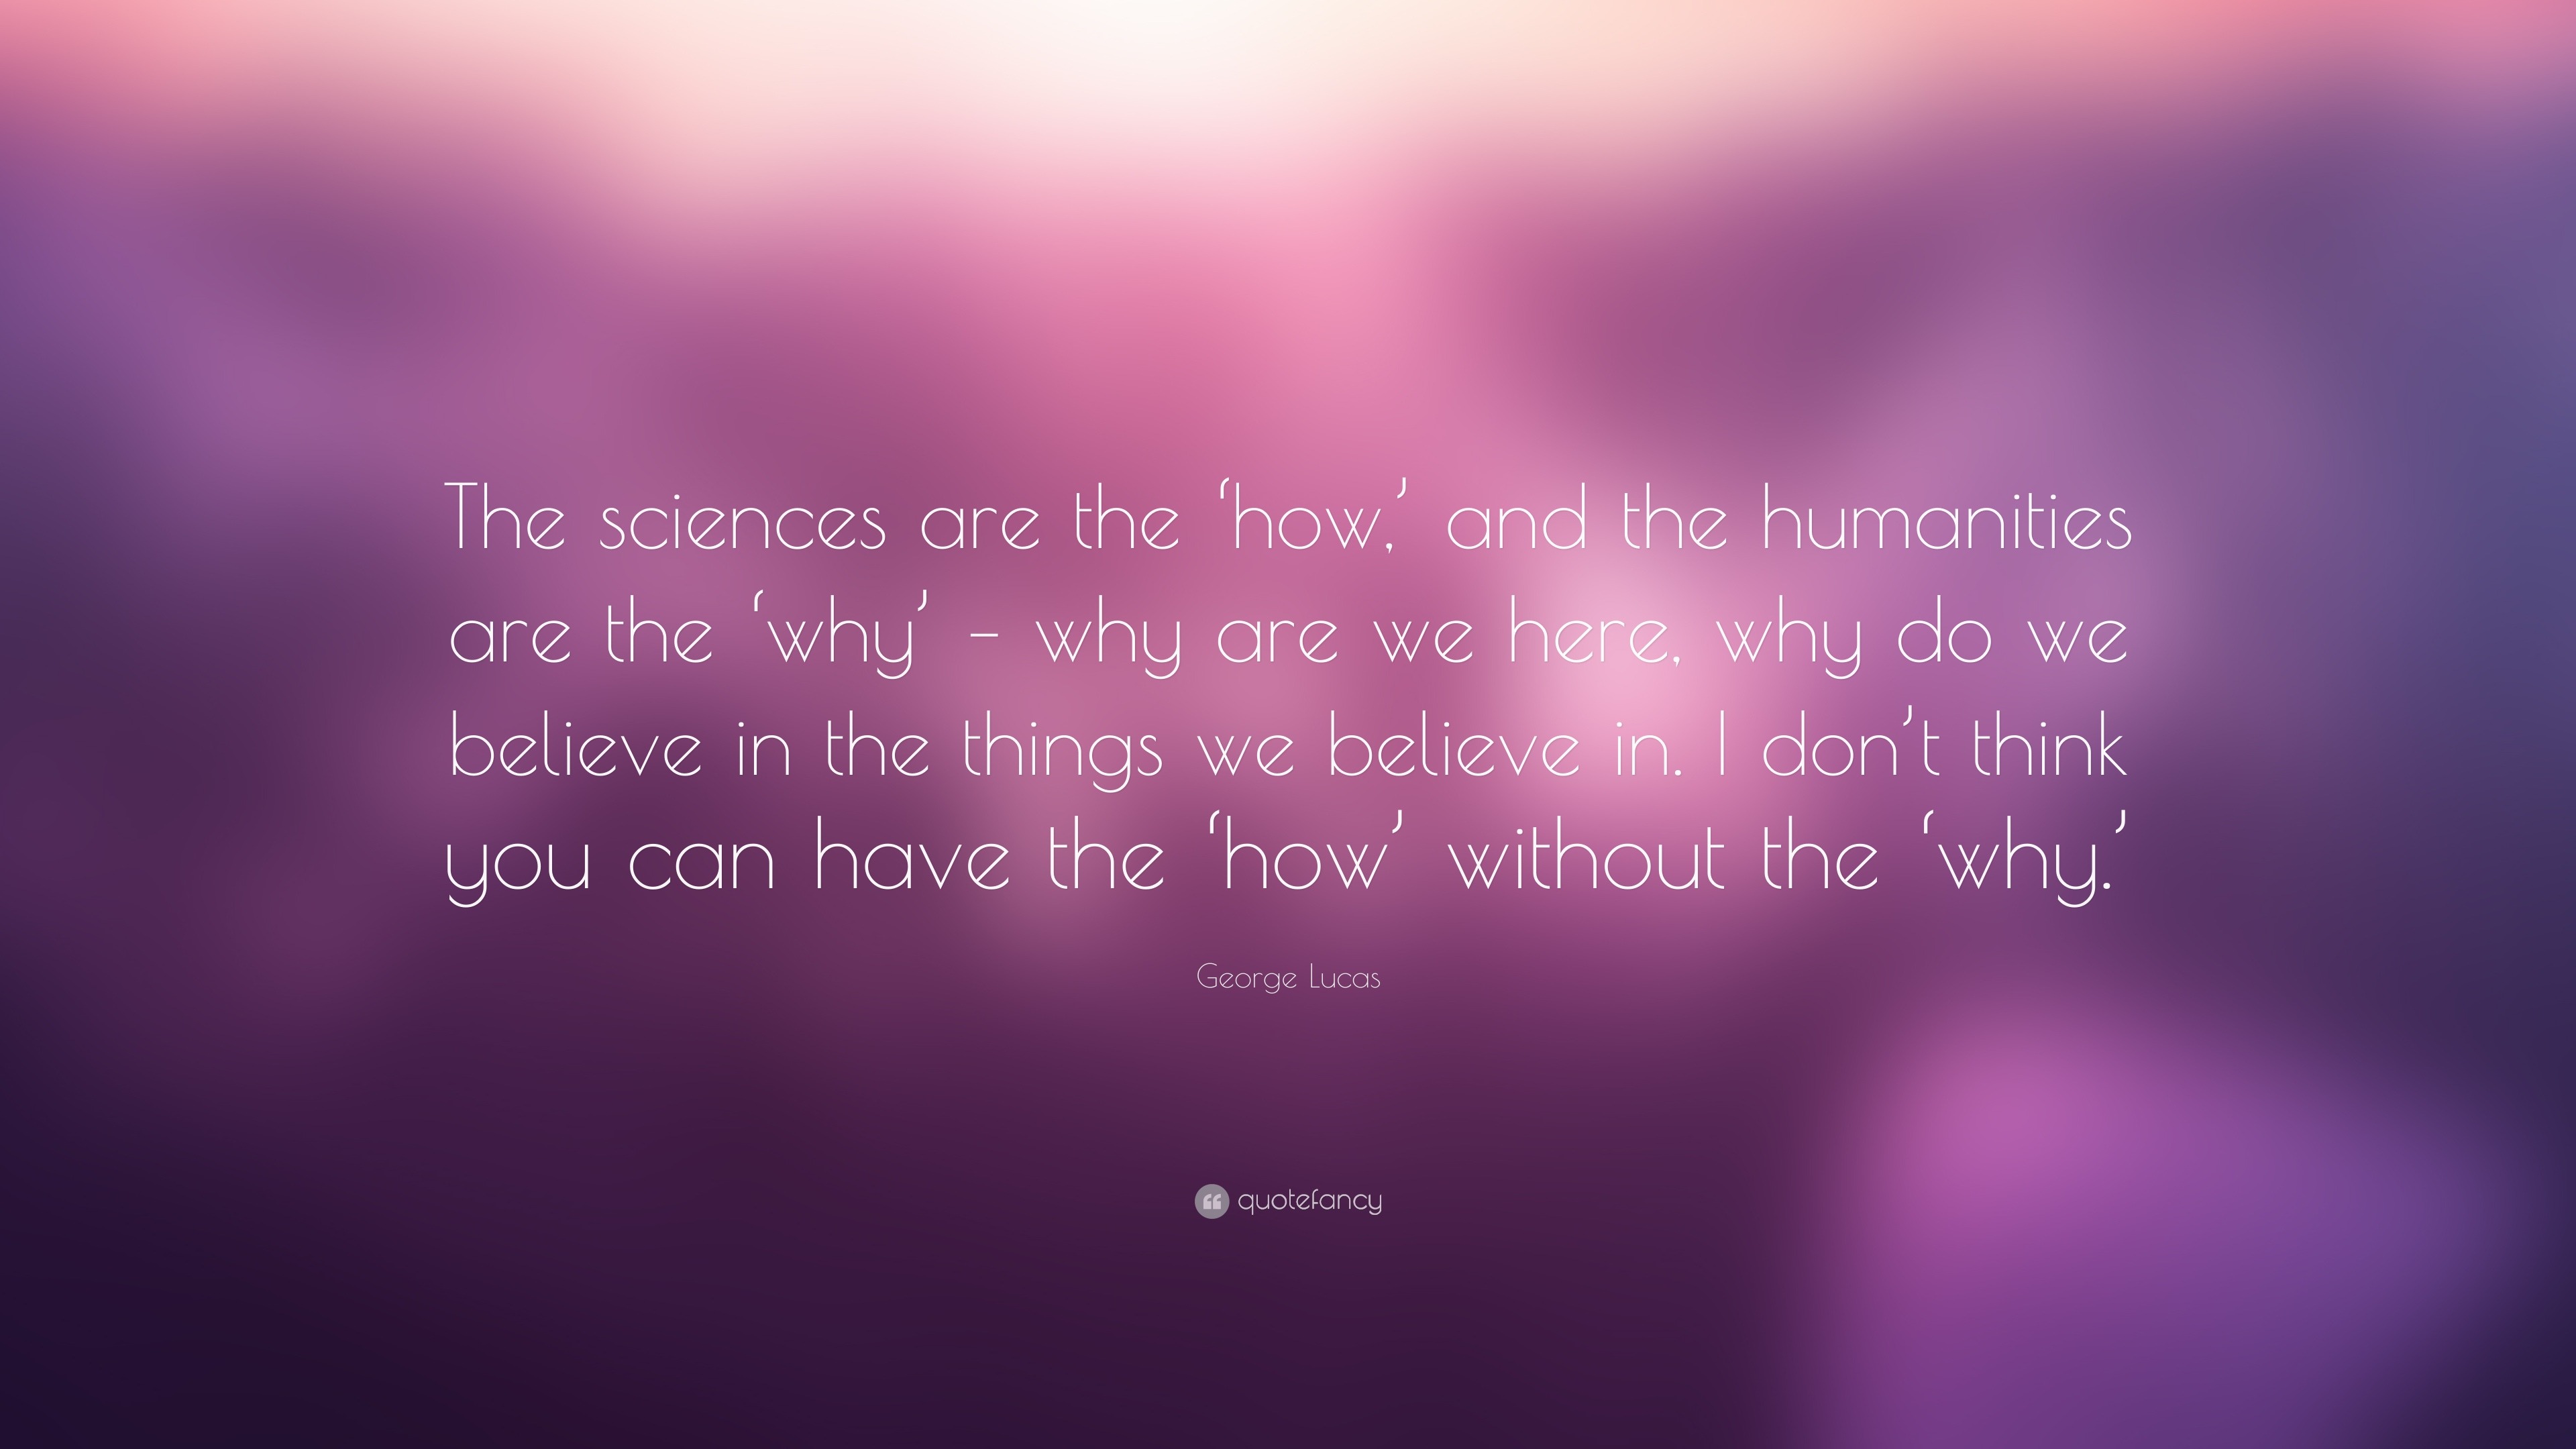 George Lucas Quote: “The sciences are the ‘how,’ and the humanities are ...